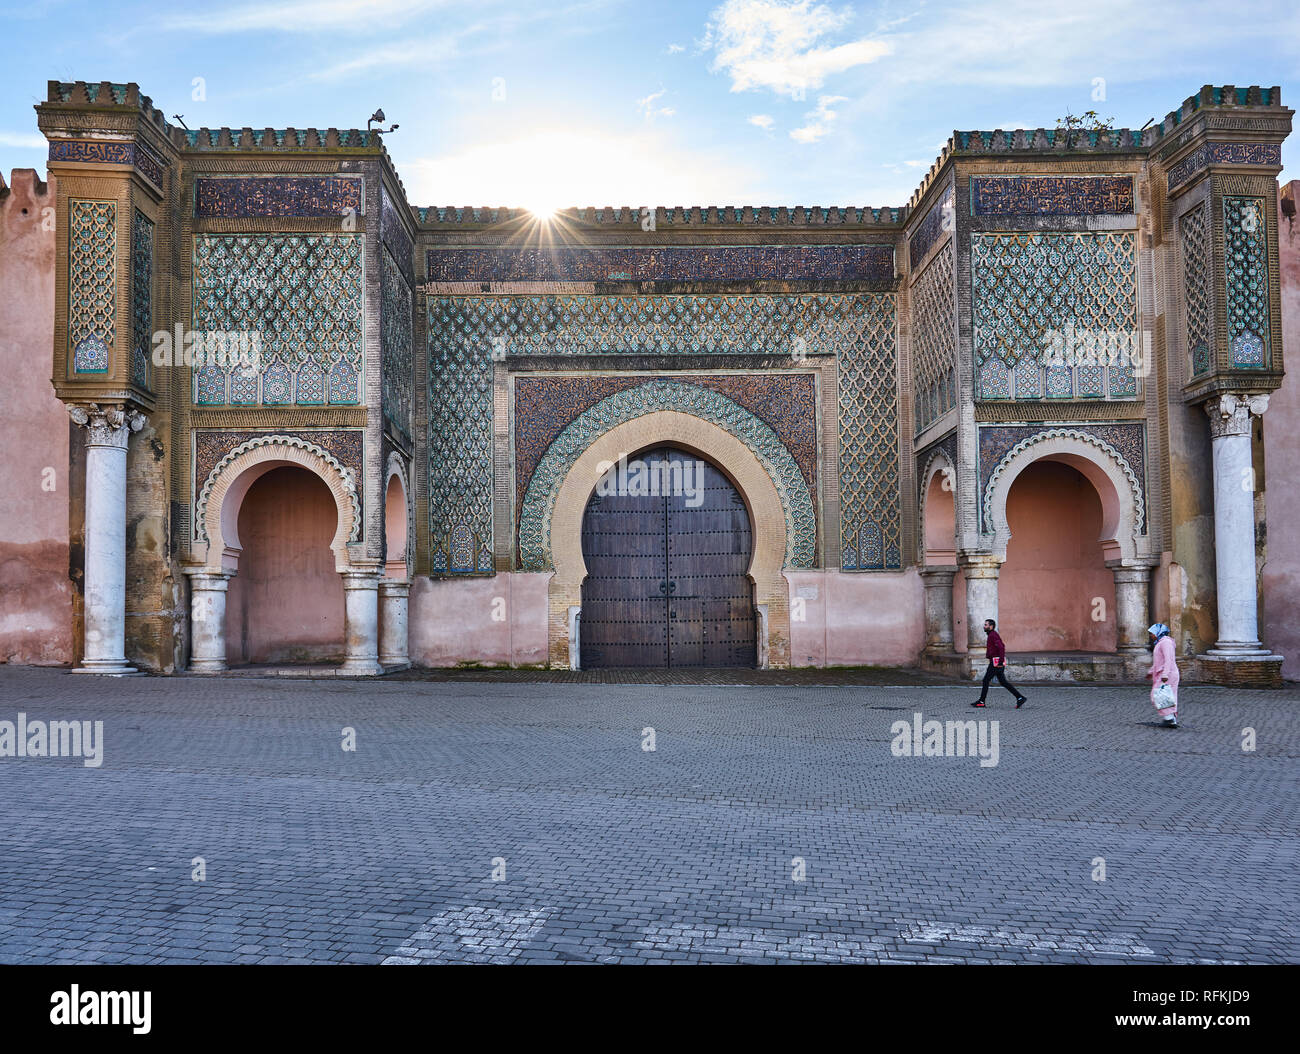 Bab El Mansour Gate, Meknes, Morocco. Main gate between the Medina and Imperial City of Meknes. Stock Photo